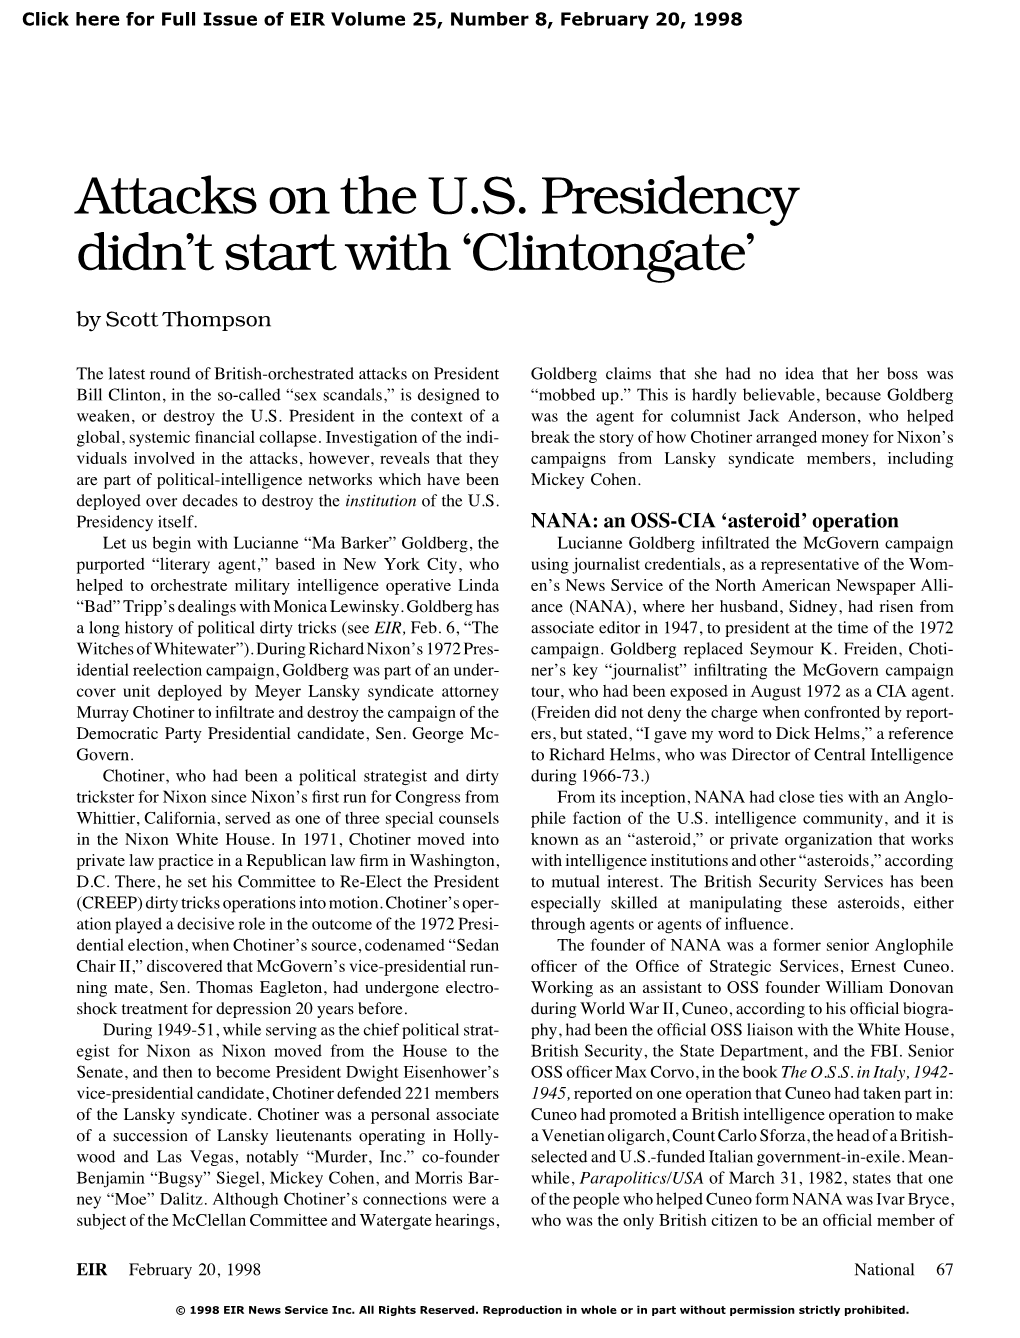 Attacks on the US Presidency Didn't Start With